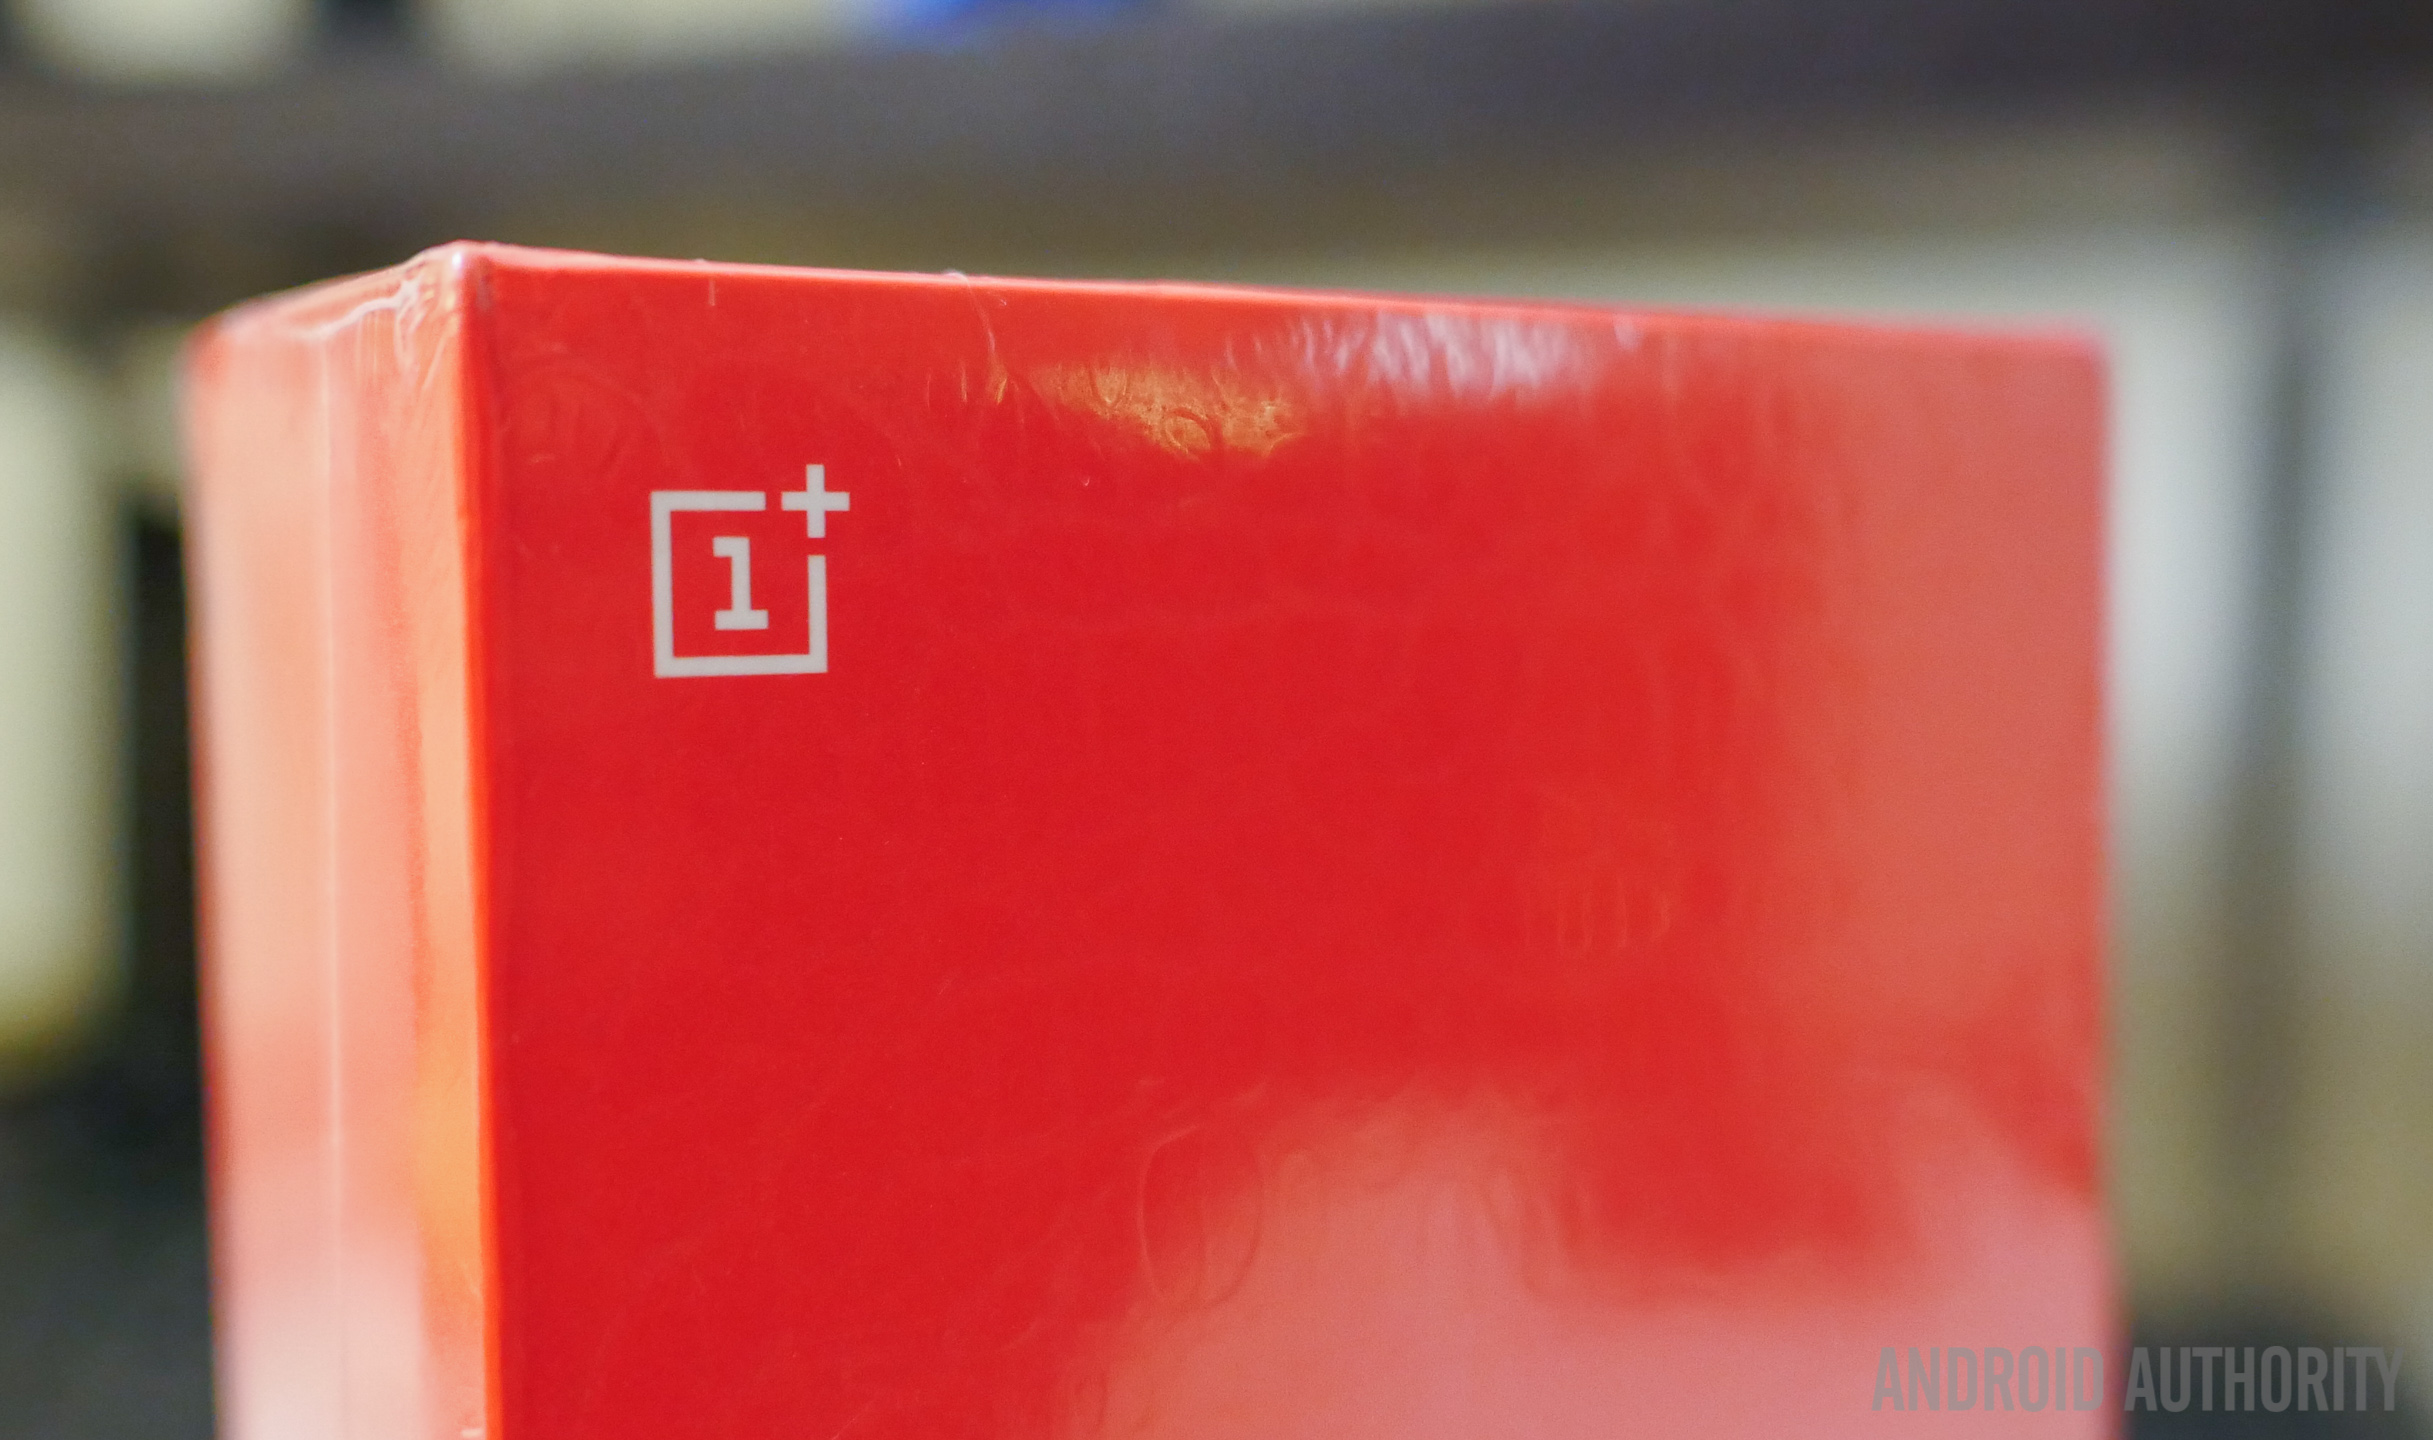 oneplus 2 unboxing initial setup aa (4 of 32)